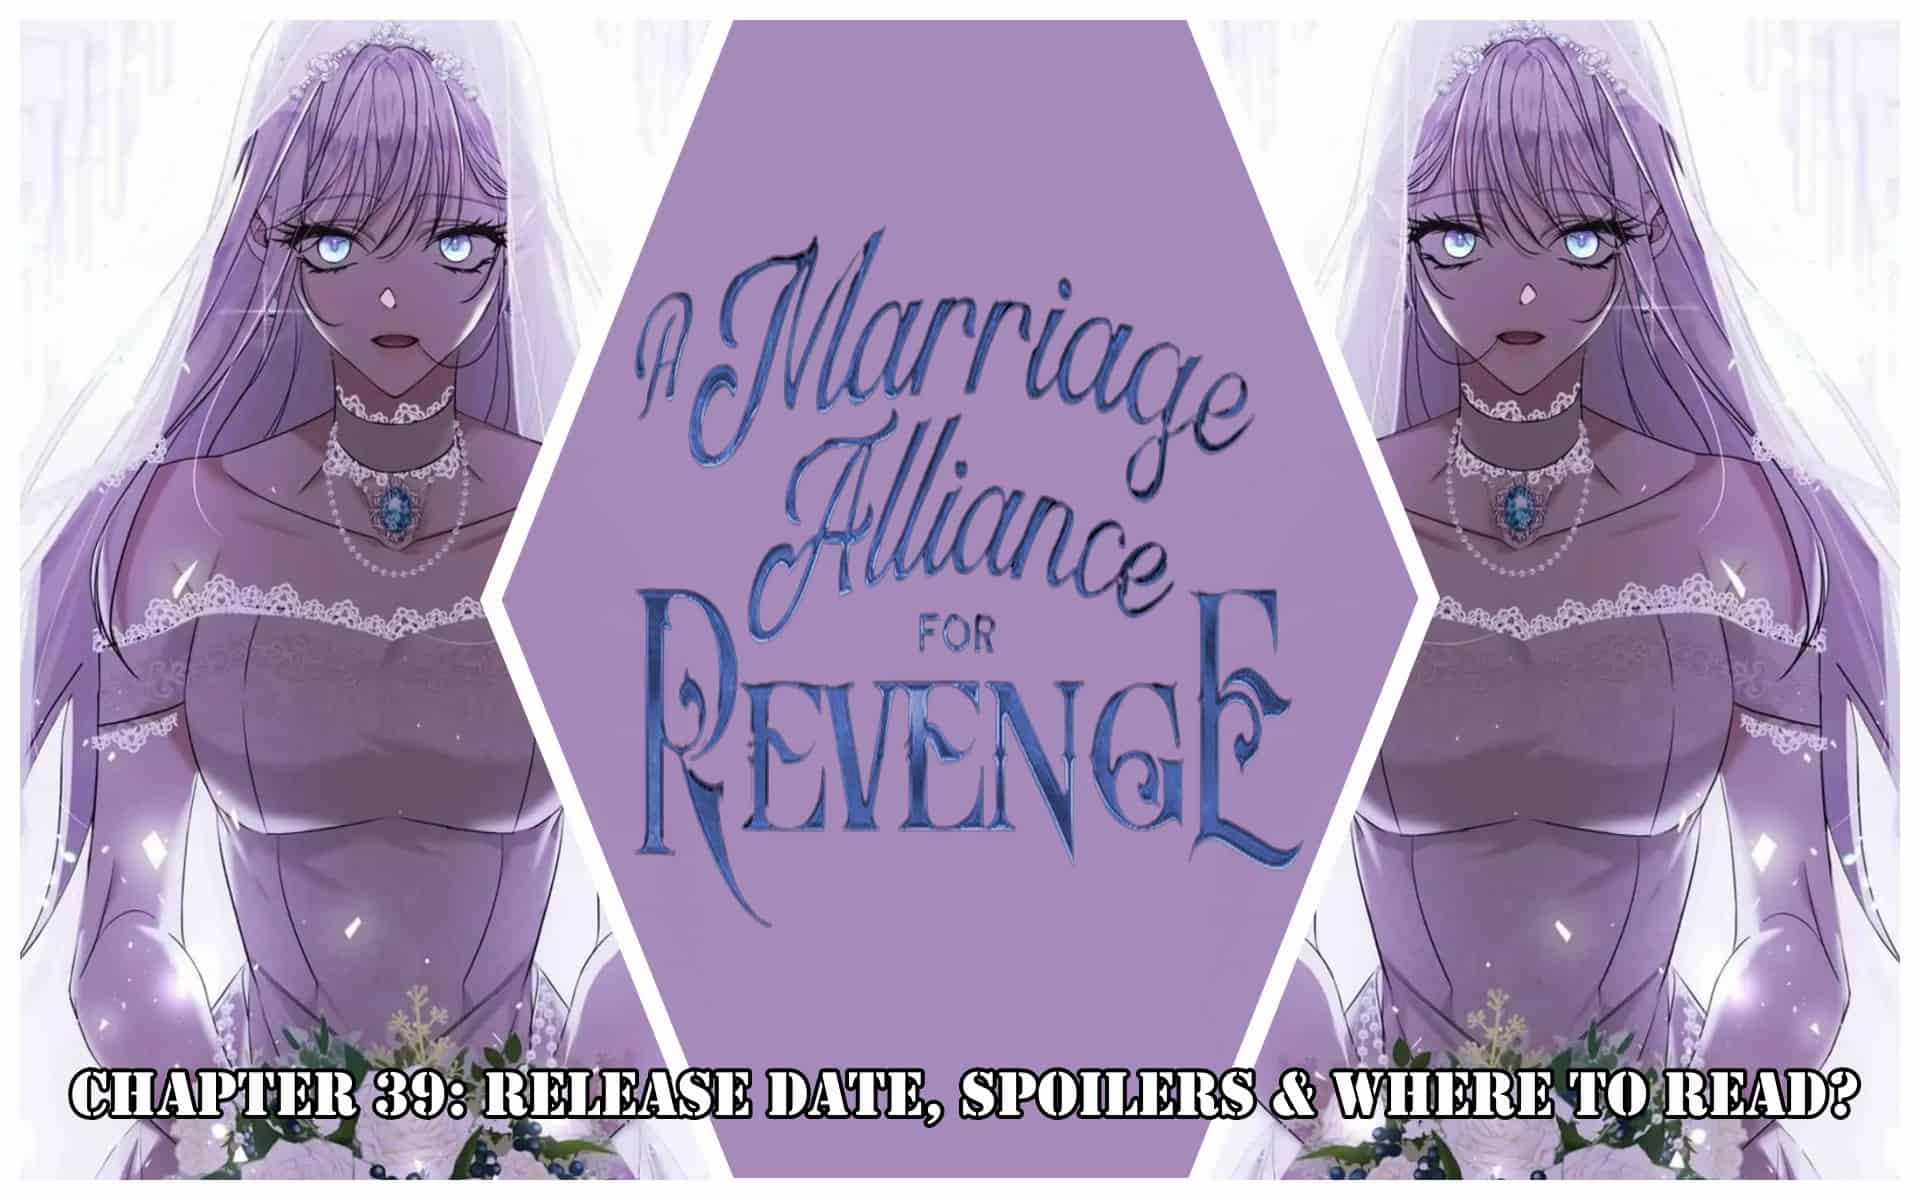 Marriage Alliance For Revenge Chapter 39: Release Date, Spoilers & Where to Read?